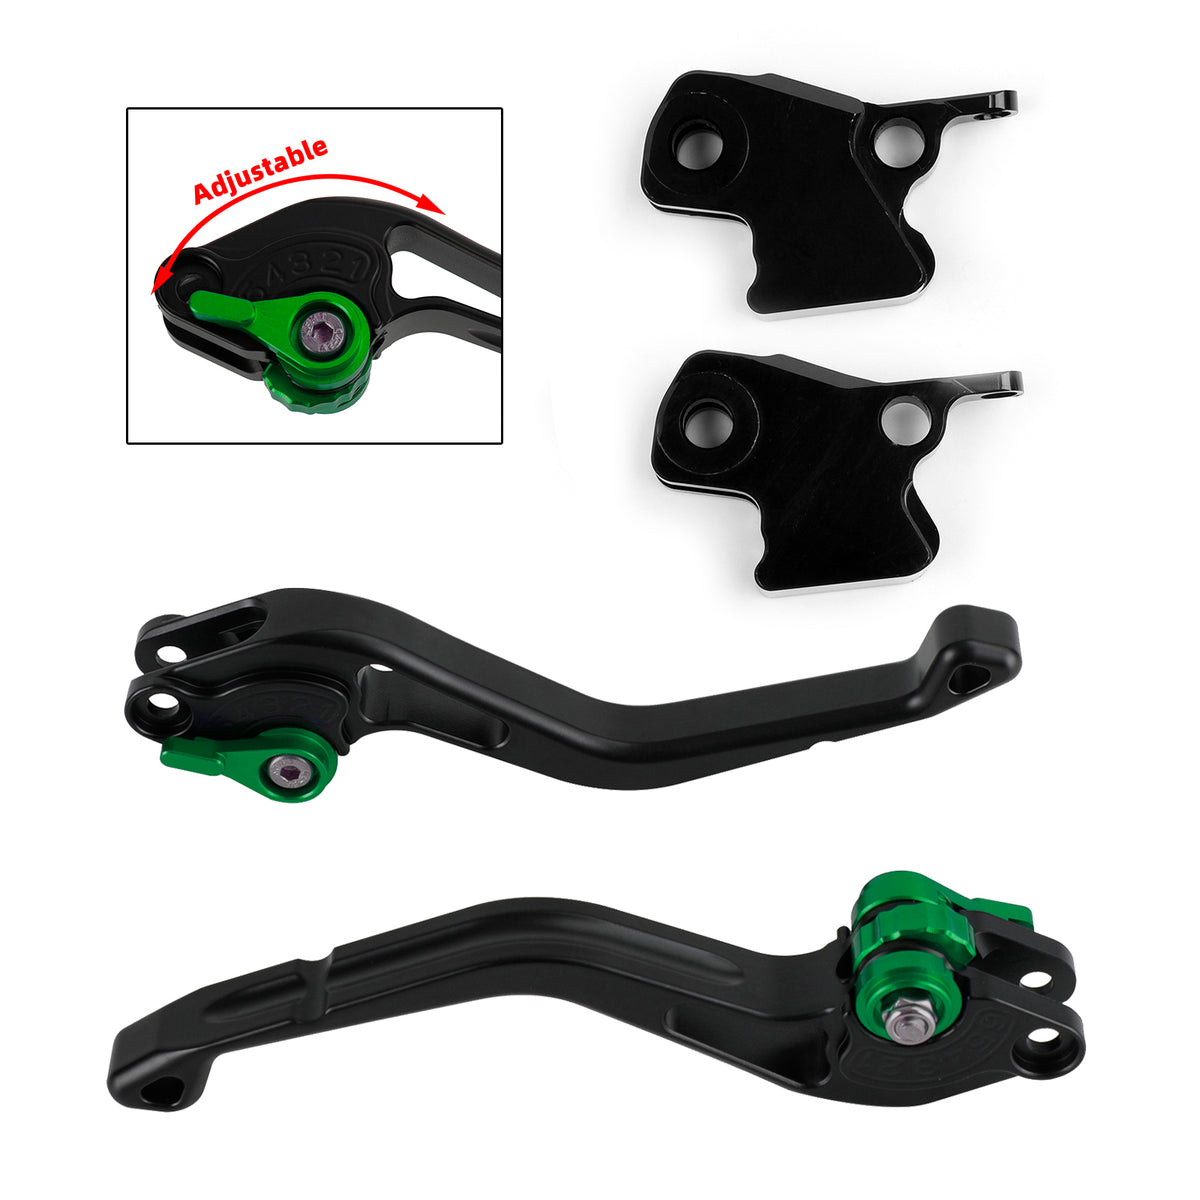 NEW Short Clutch Brake Lever fit for BMW K1200R R1200R R1200GS R1200ST HP2